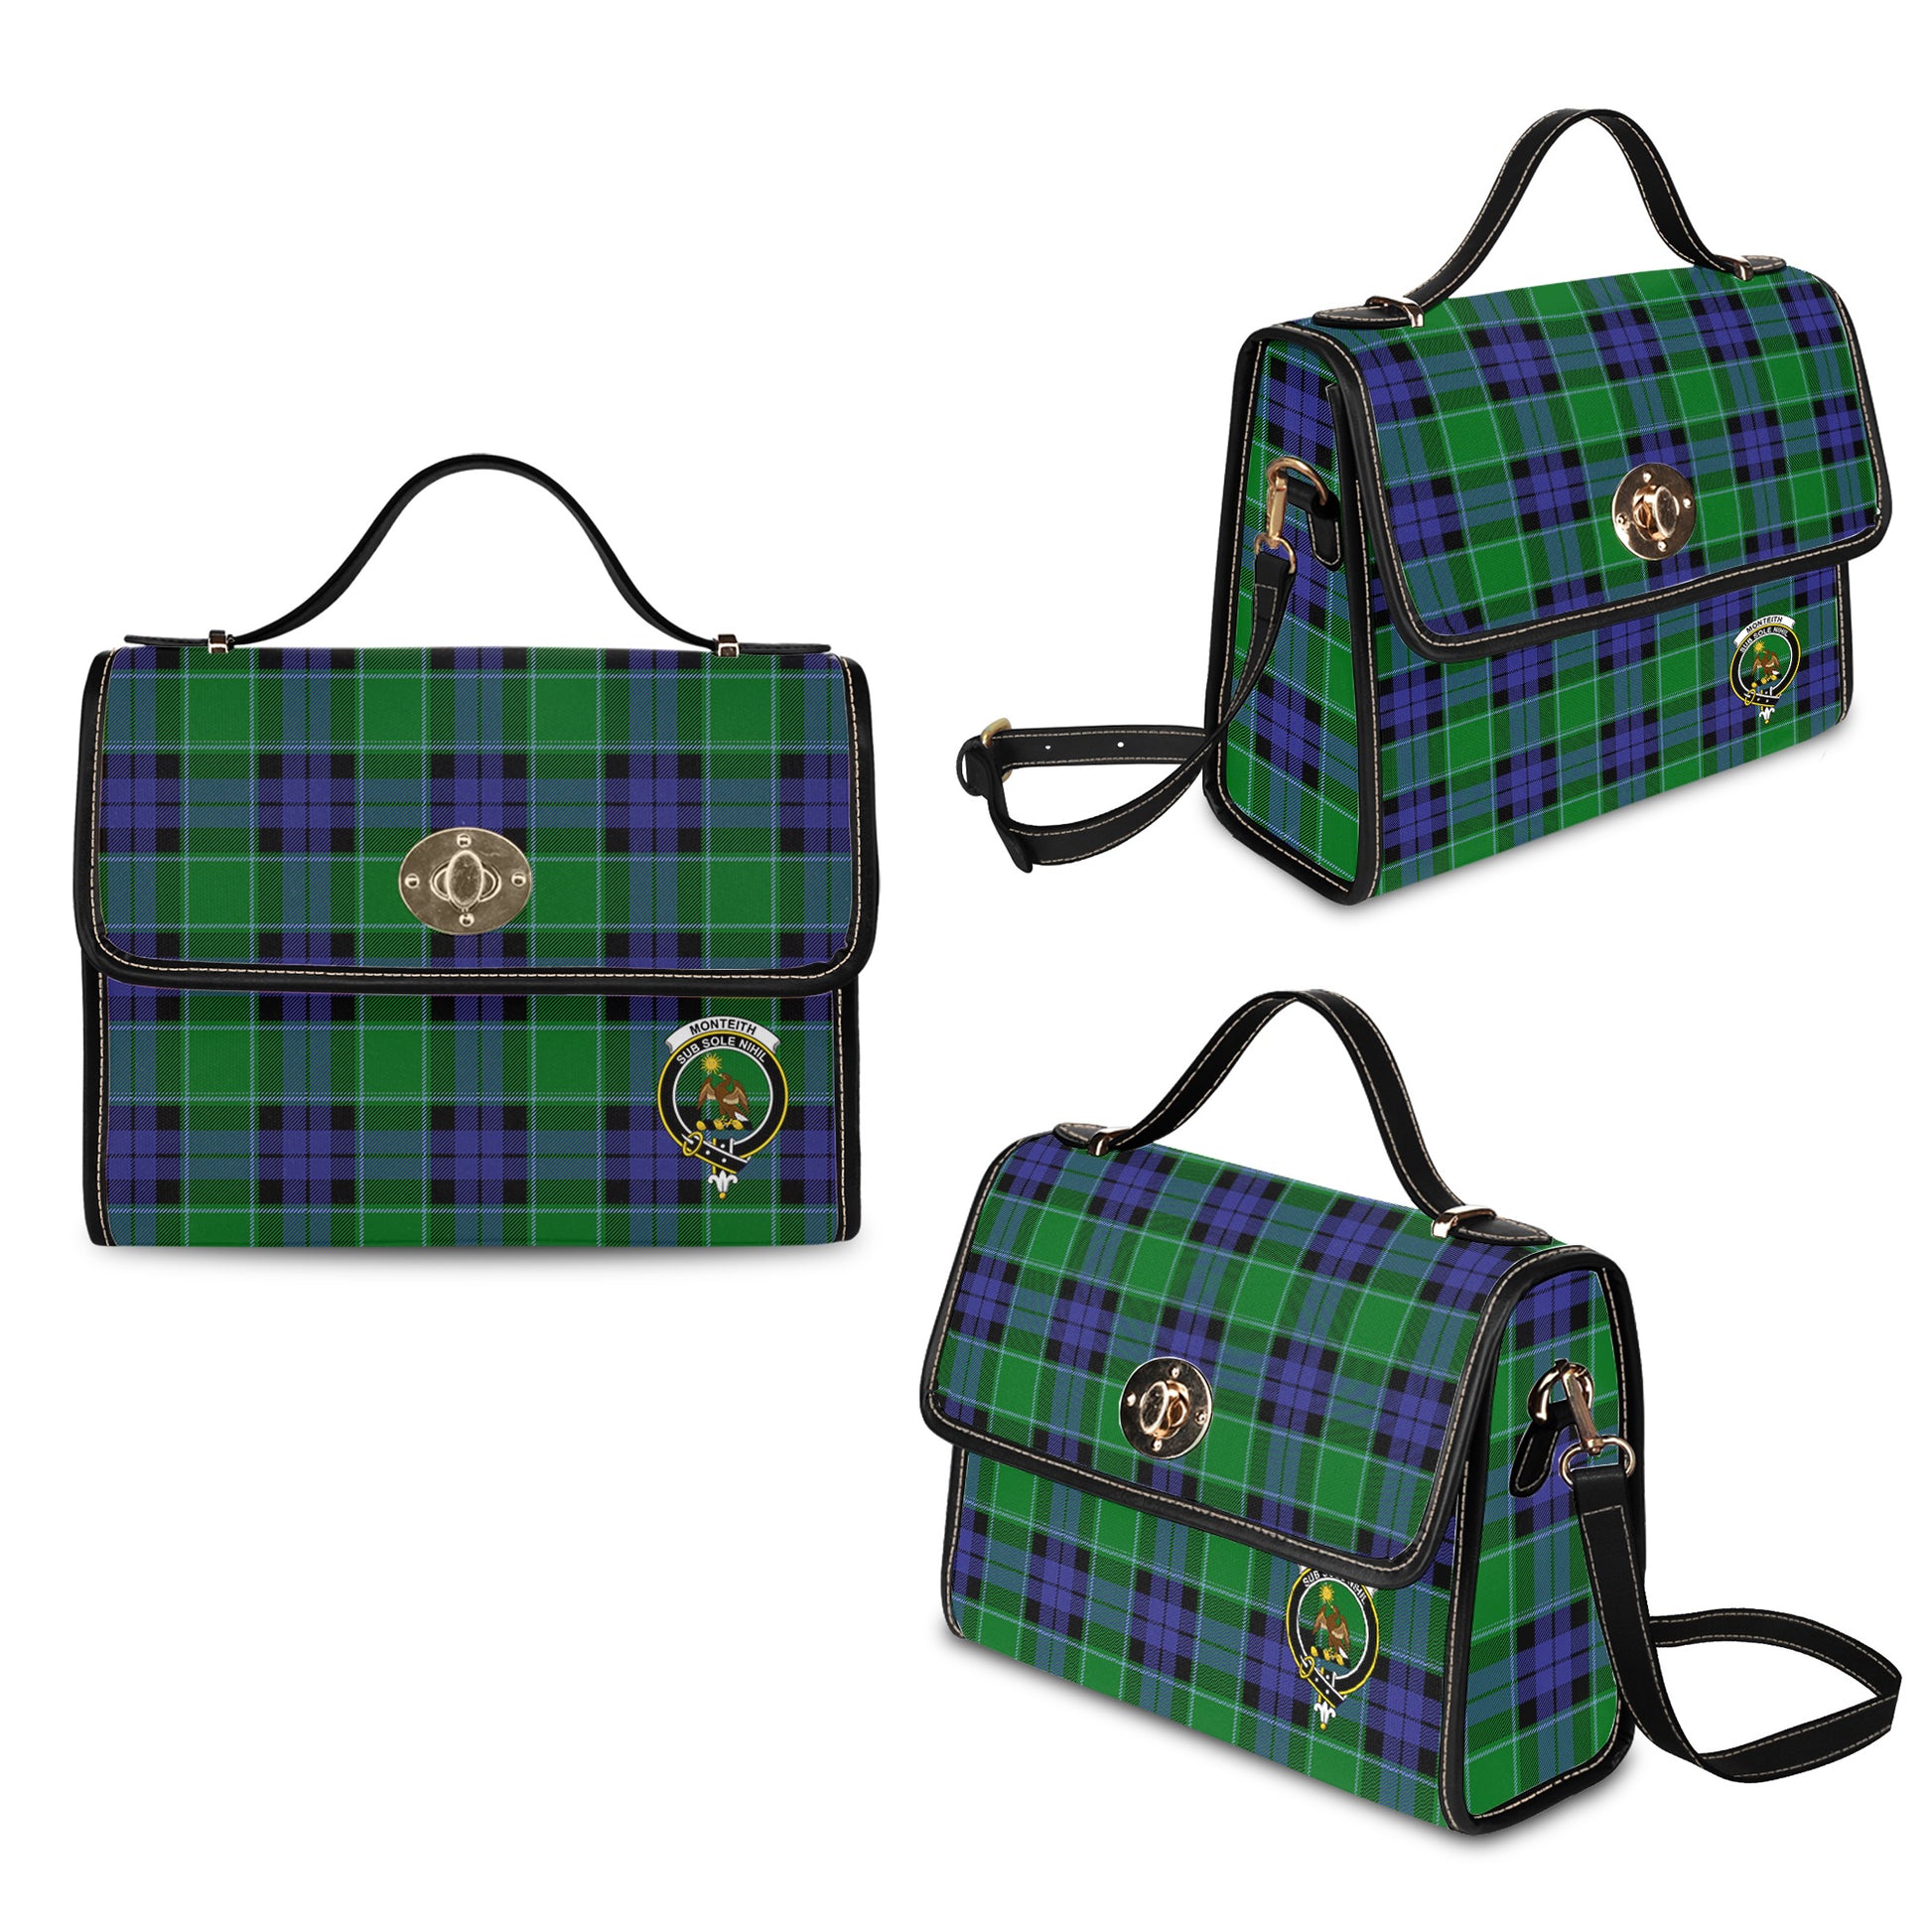 monteith-tartan-leather-strap-waterproof-canvas-bag-with-family-crest